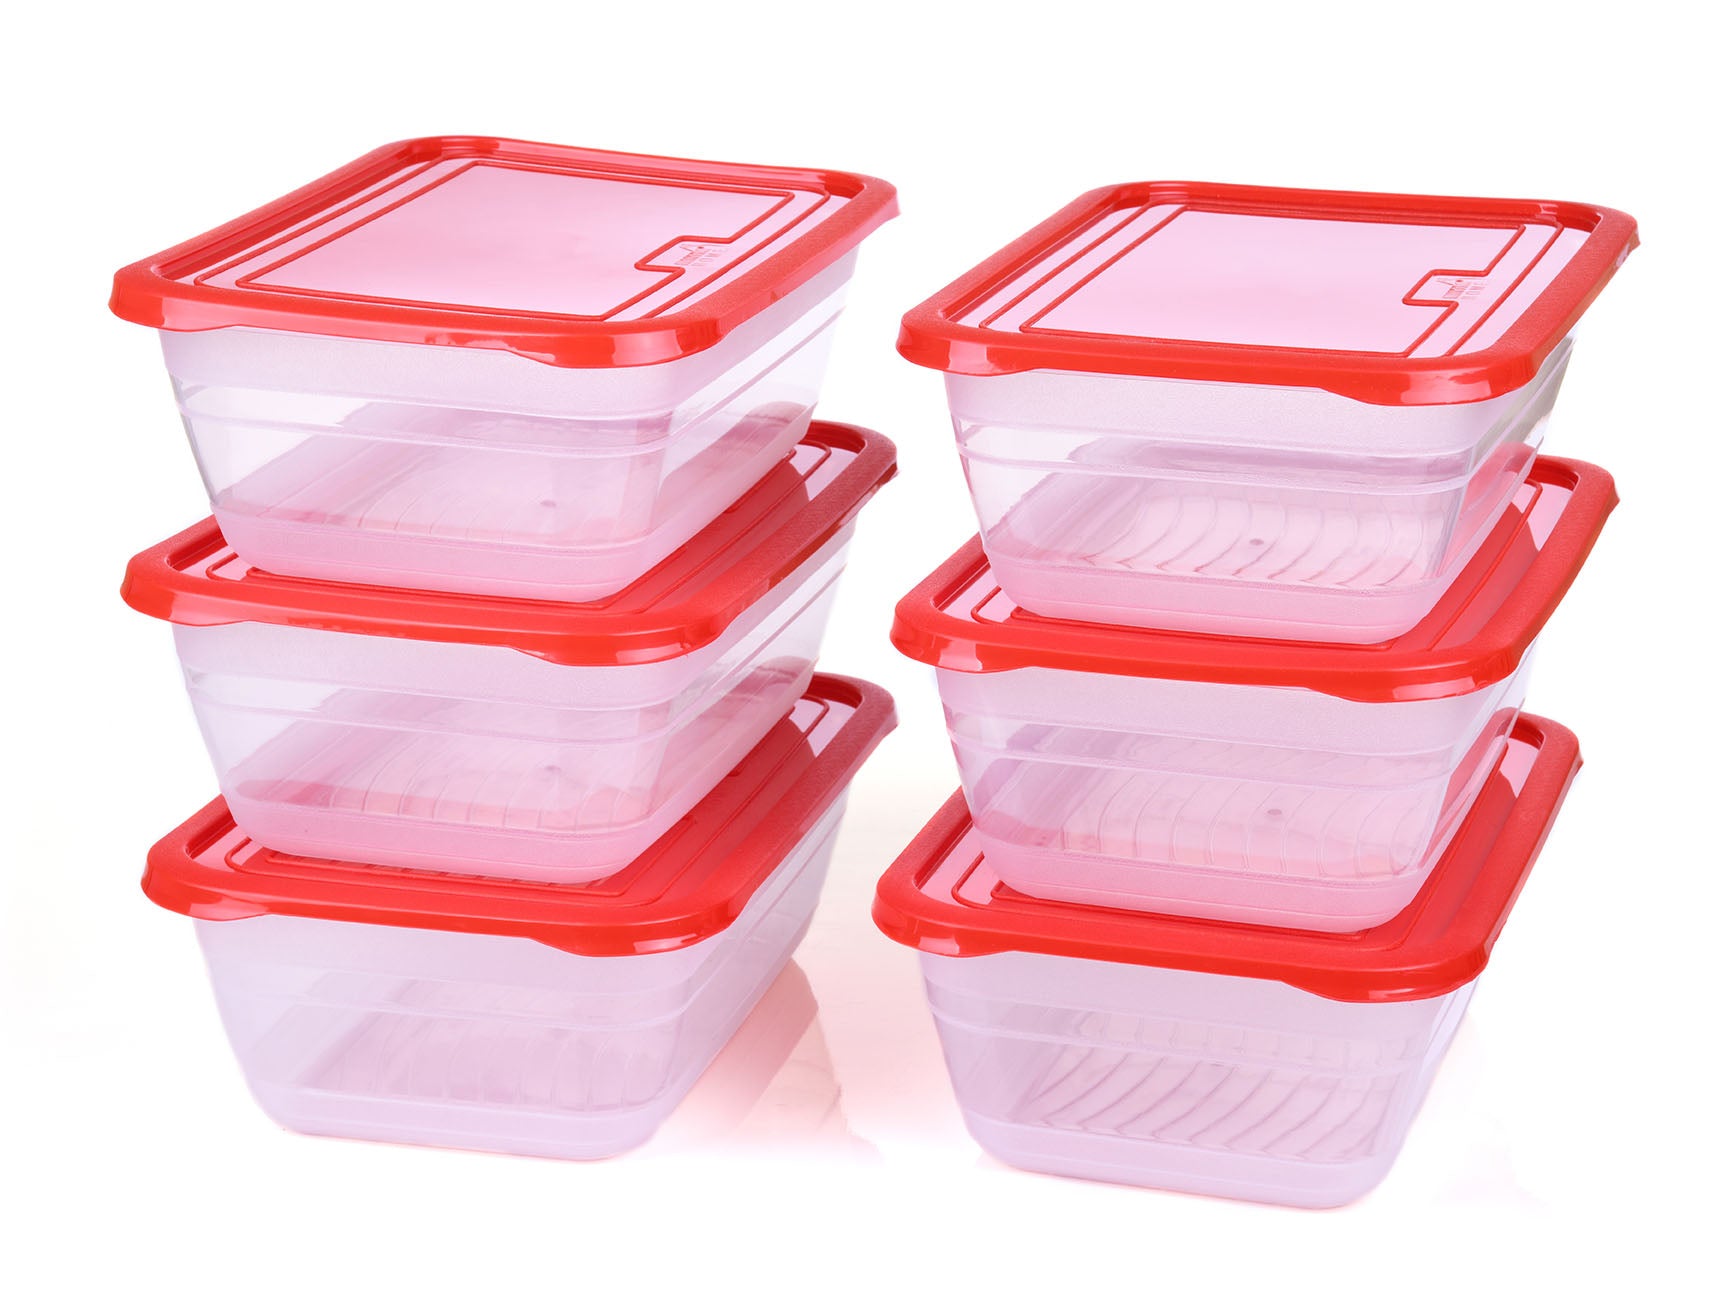 Mintra Home - Plastic Bowls with Covers 4 Pack Red